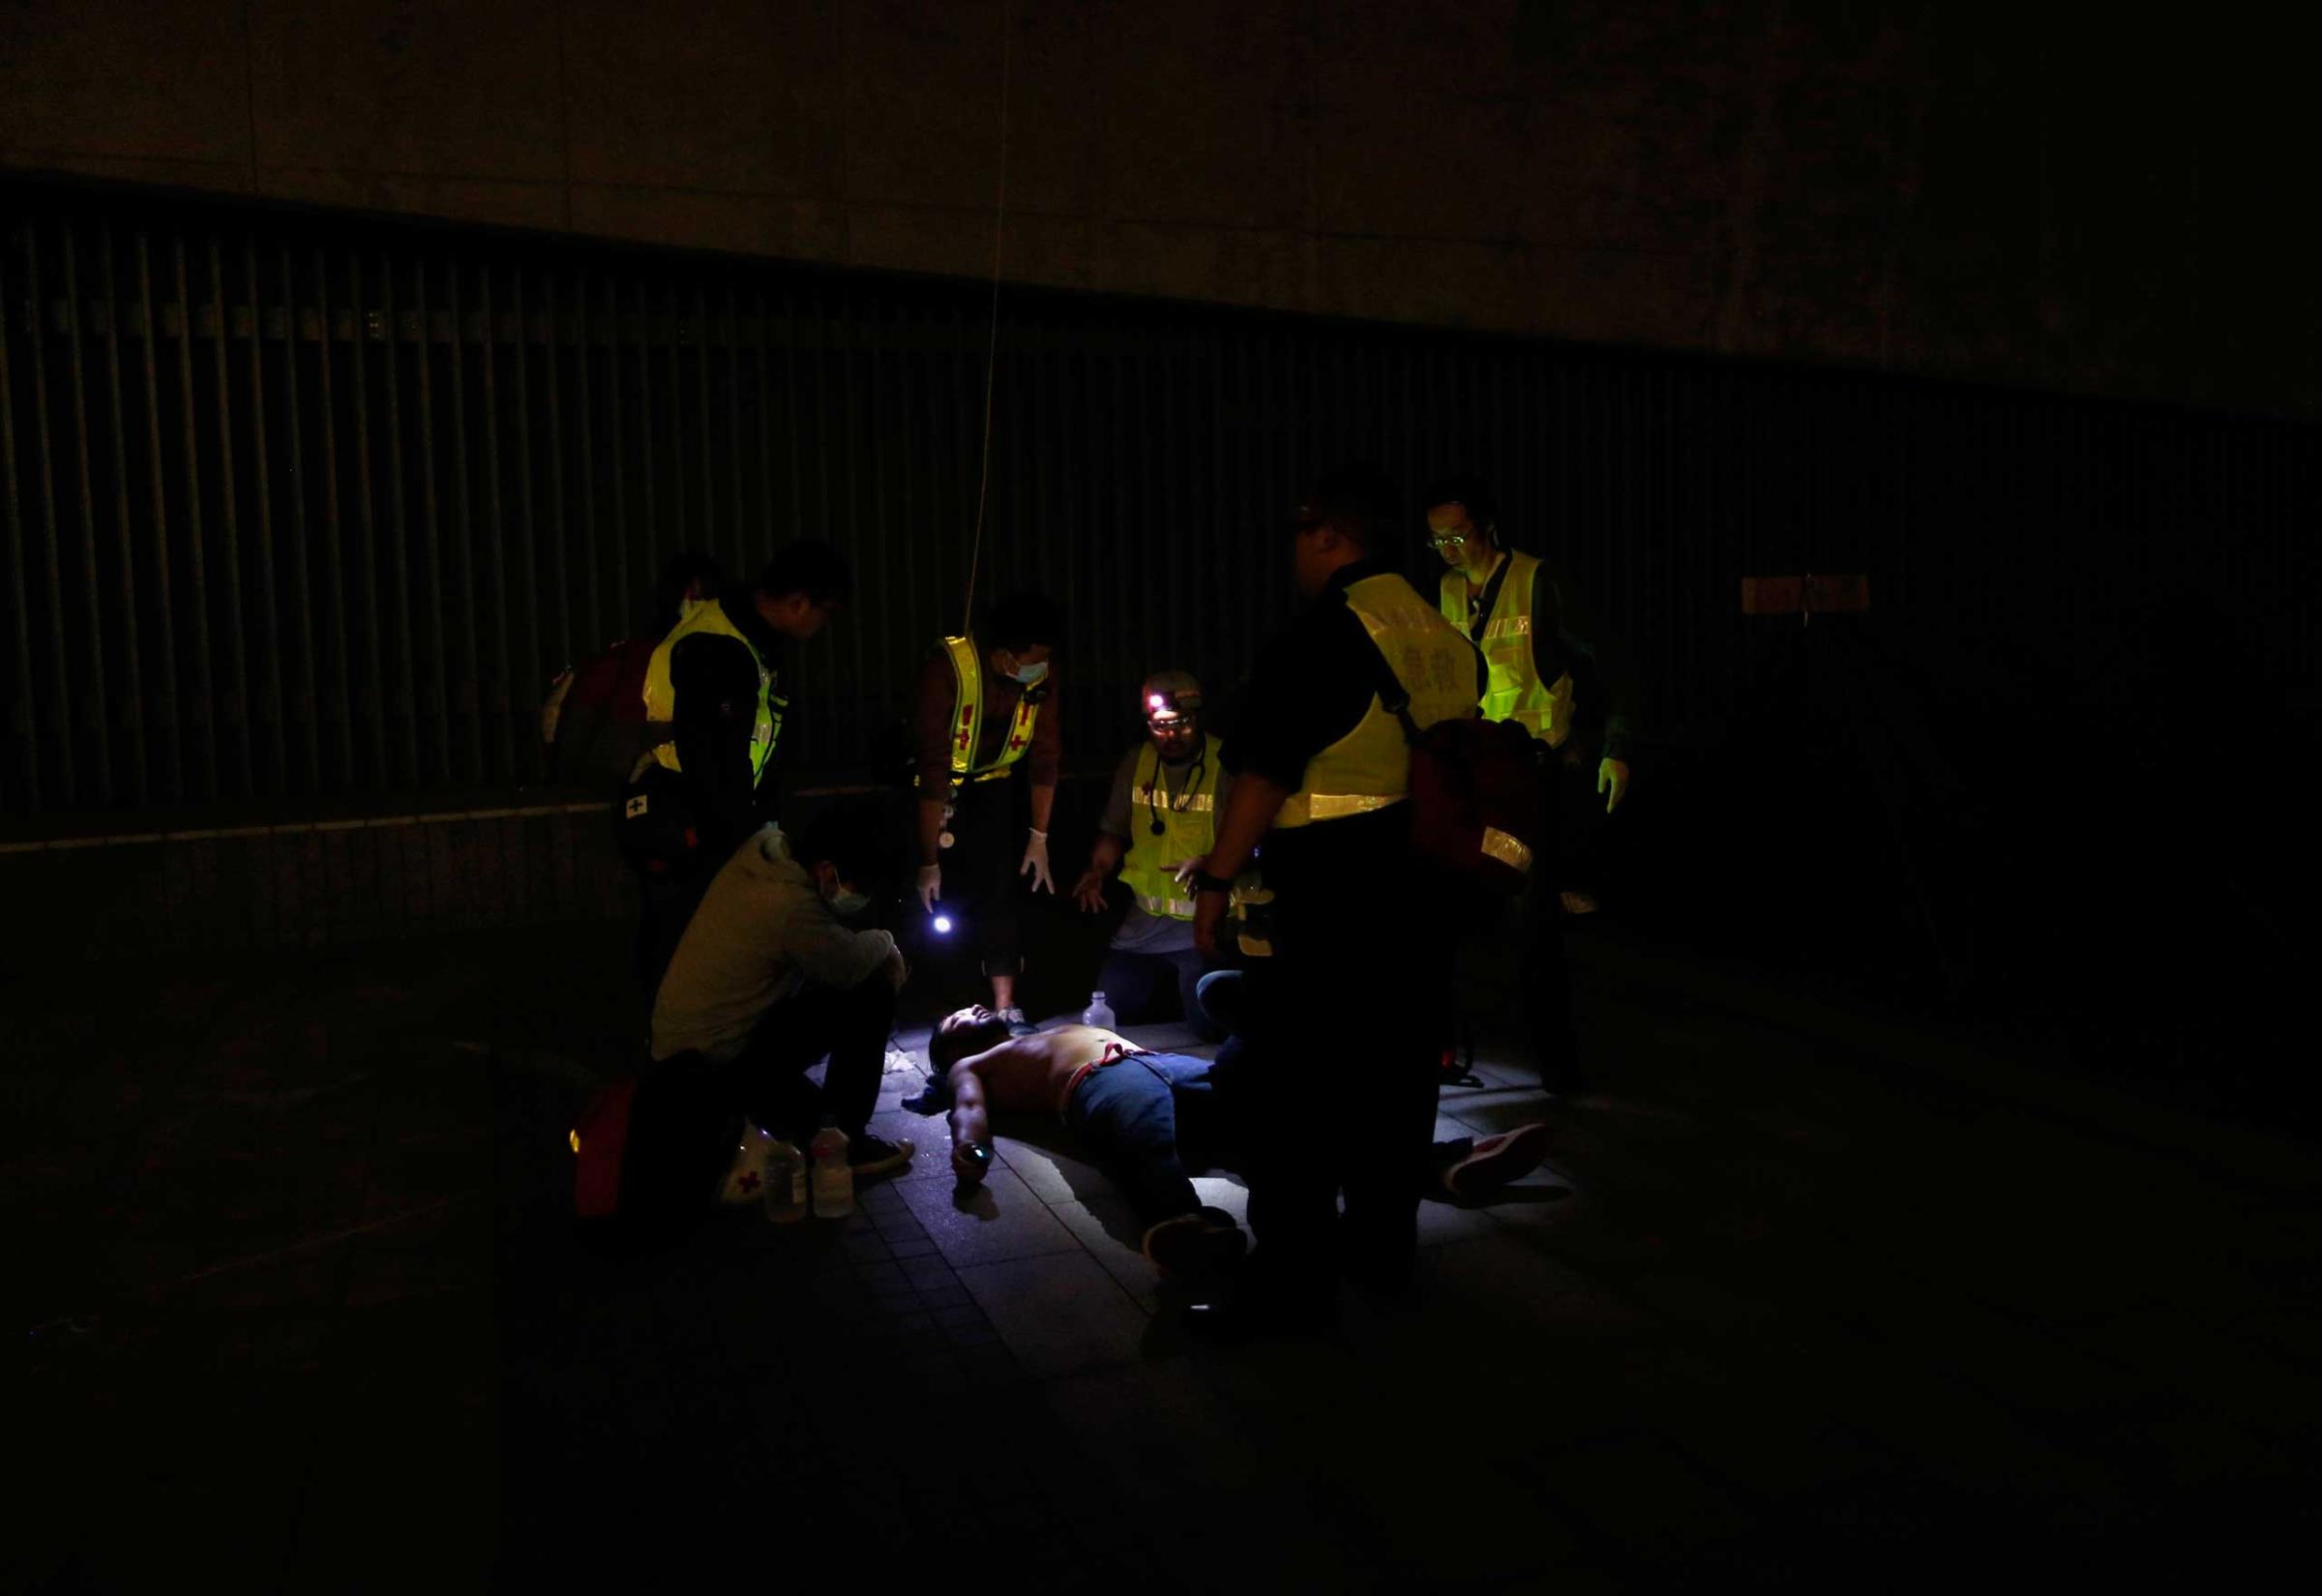 A pro-democracy protester is examined by rescue volunteers after being pepper sprayed by the police as he and others tried to break into the Legislative Council in Hong Kong early Nov. 19, 2014, in response to an earlier clear up by bailiffs on part of the "Occupy Central" protest site.